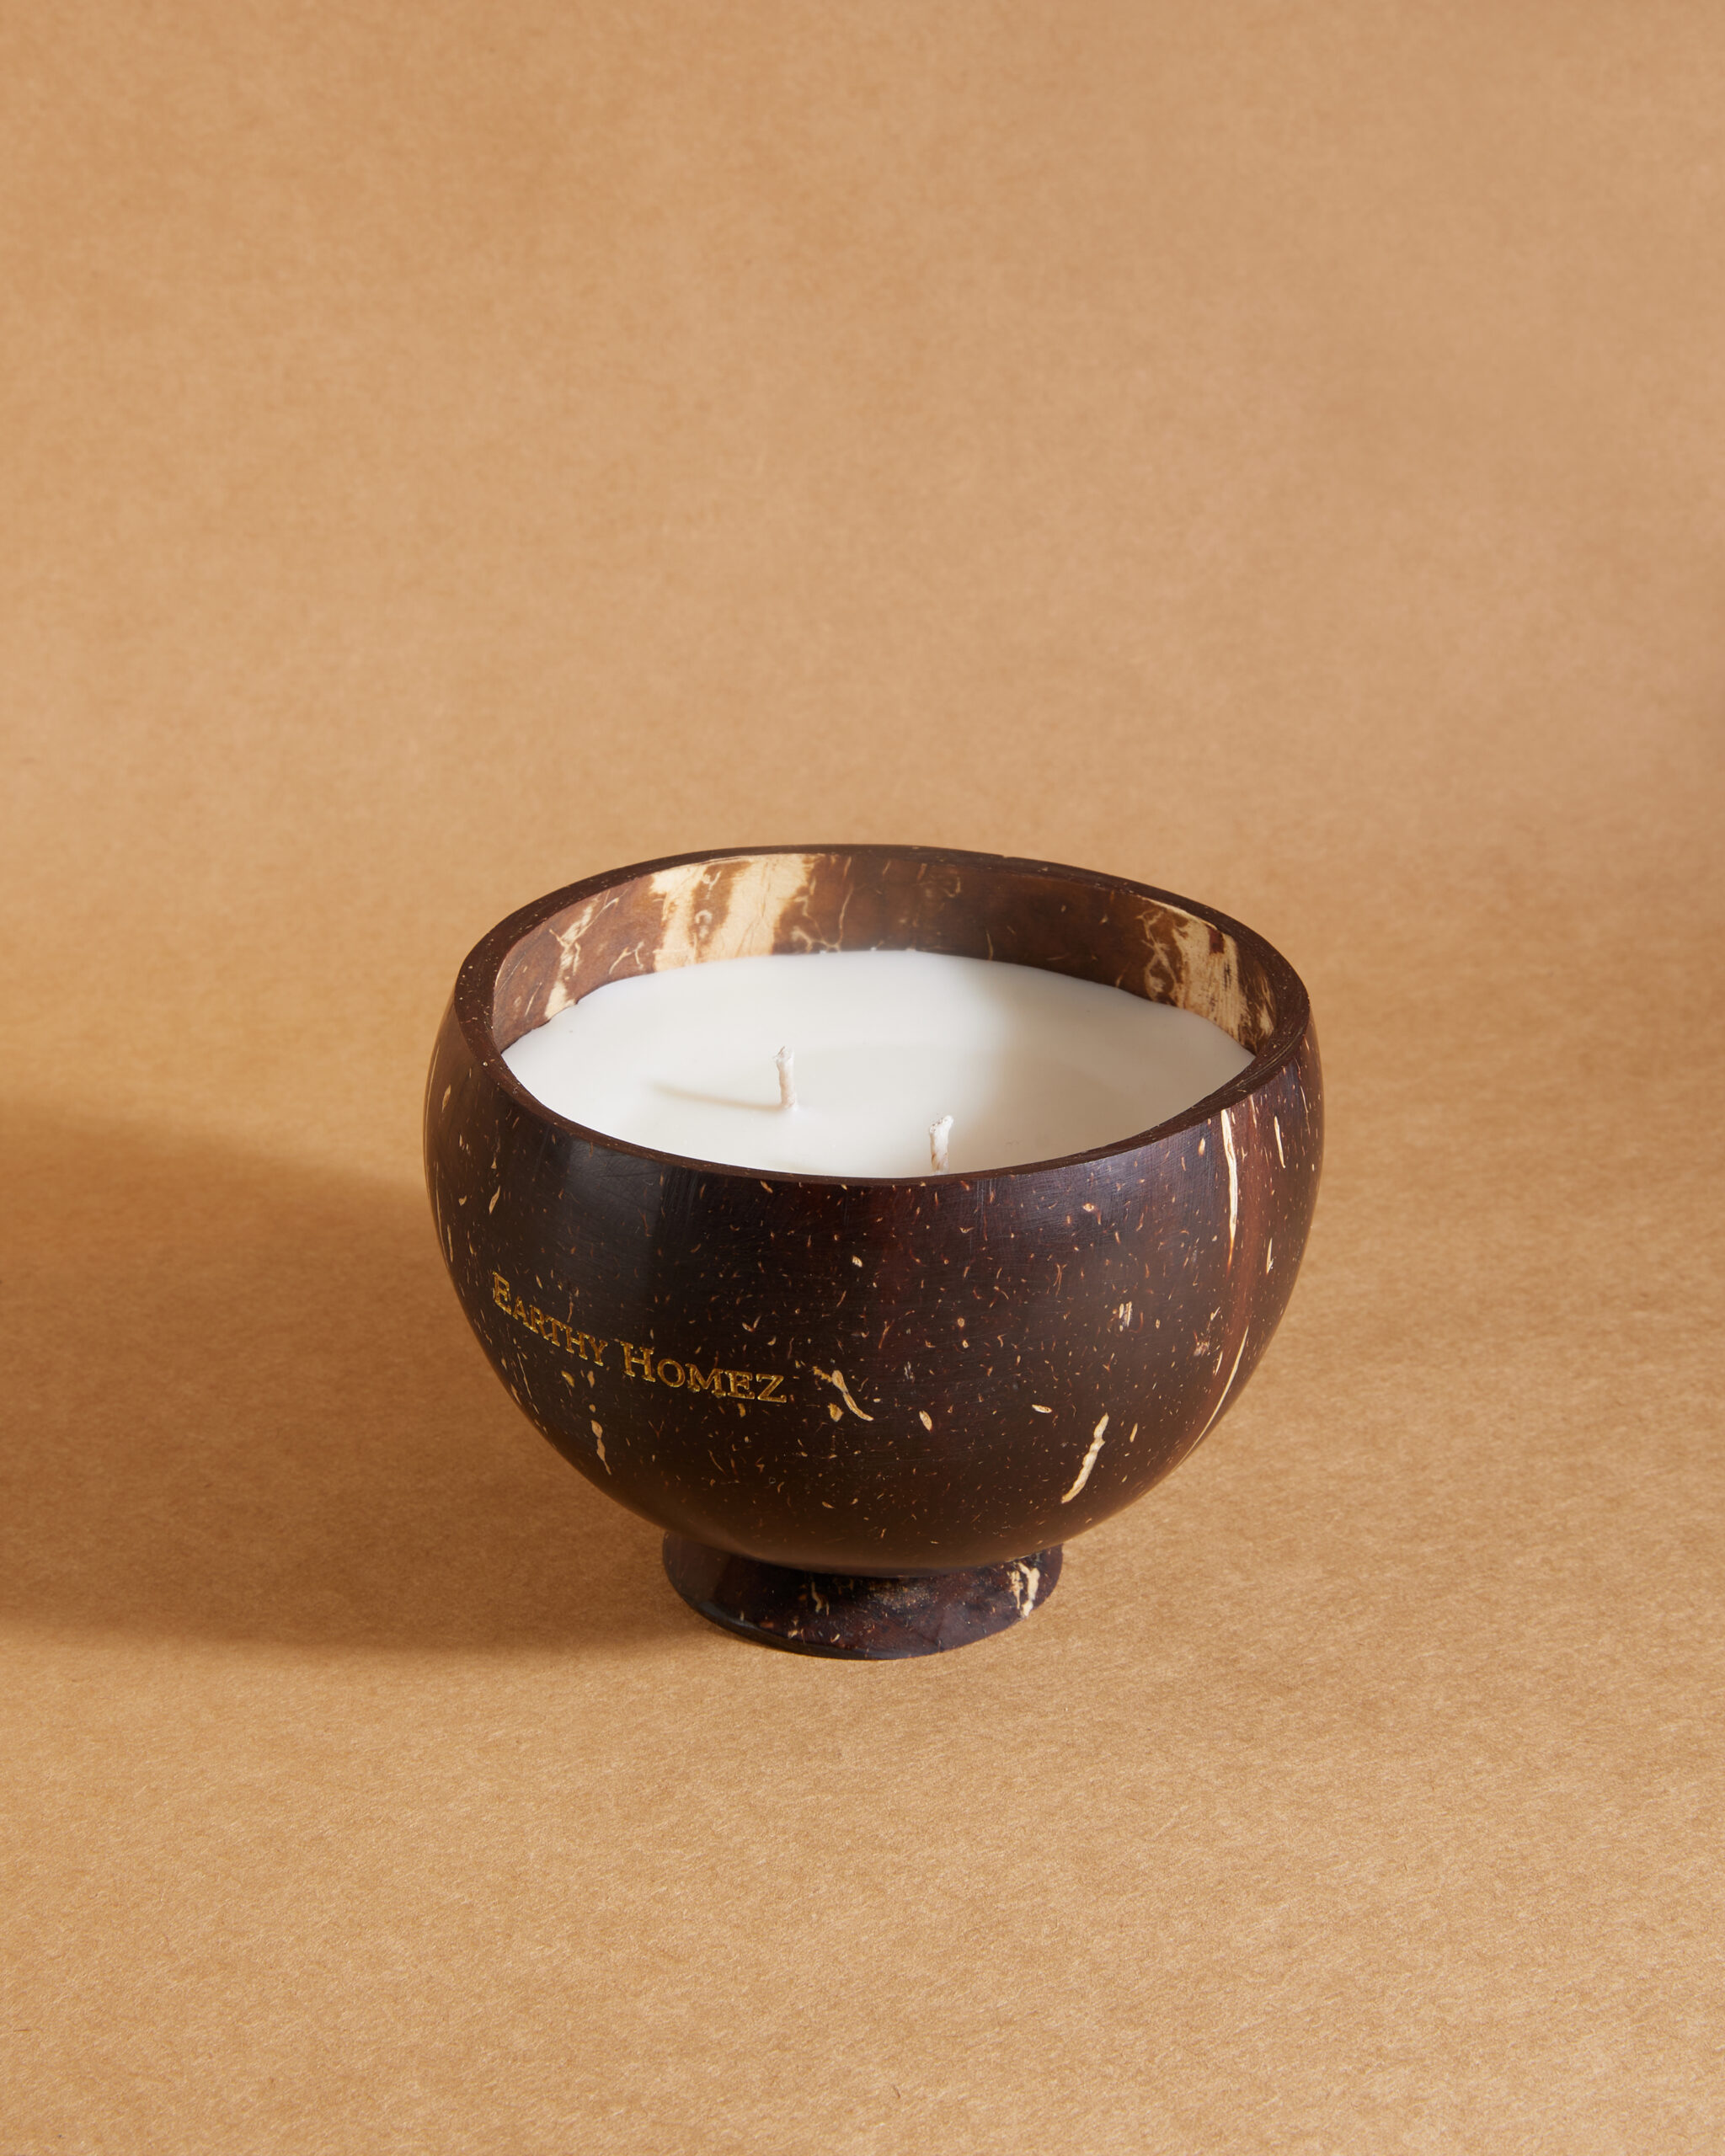 Handcrafted Coconut Shell Candle by Earthy Homez for eco-friendly ambiance.